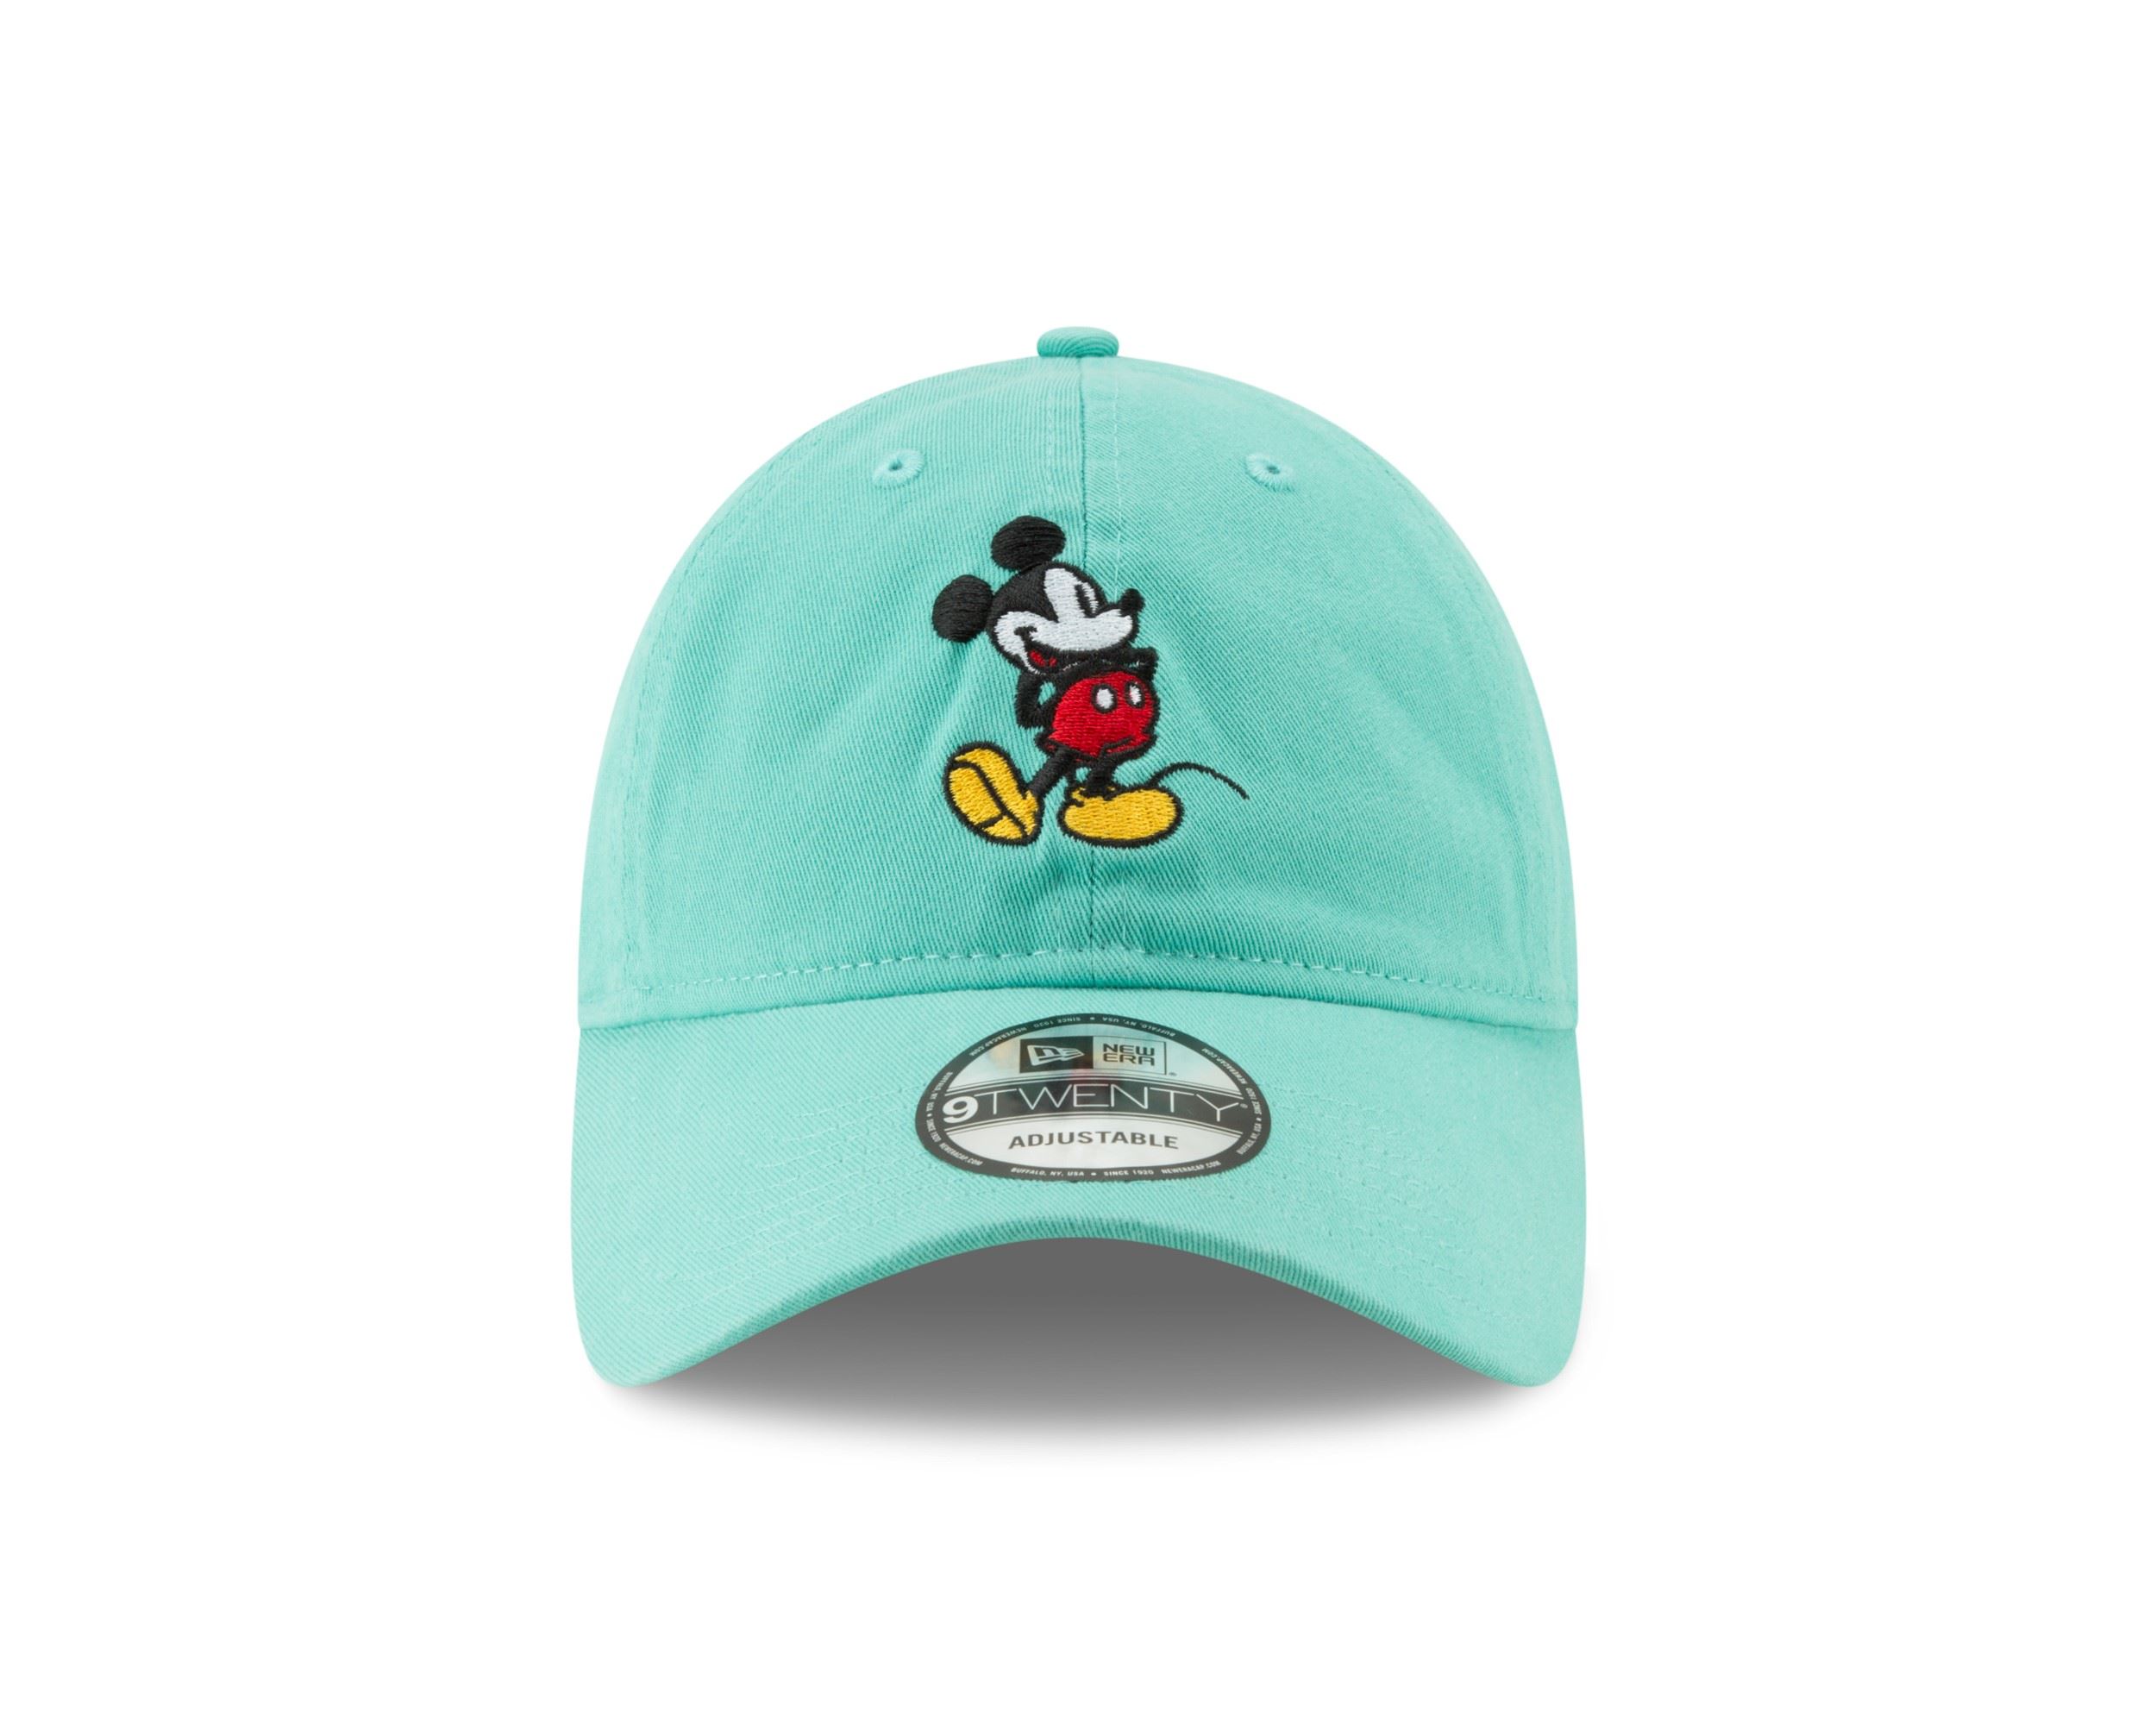 Mickey Mouse Characater Mint 9Twenty Unstructured Strapback Cap New Era